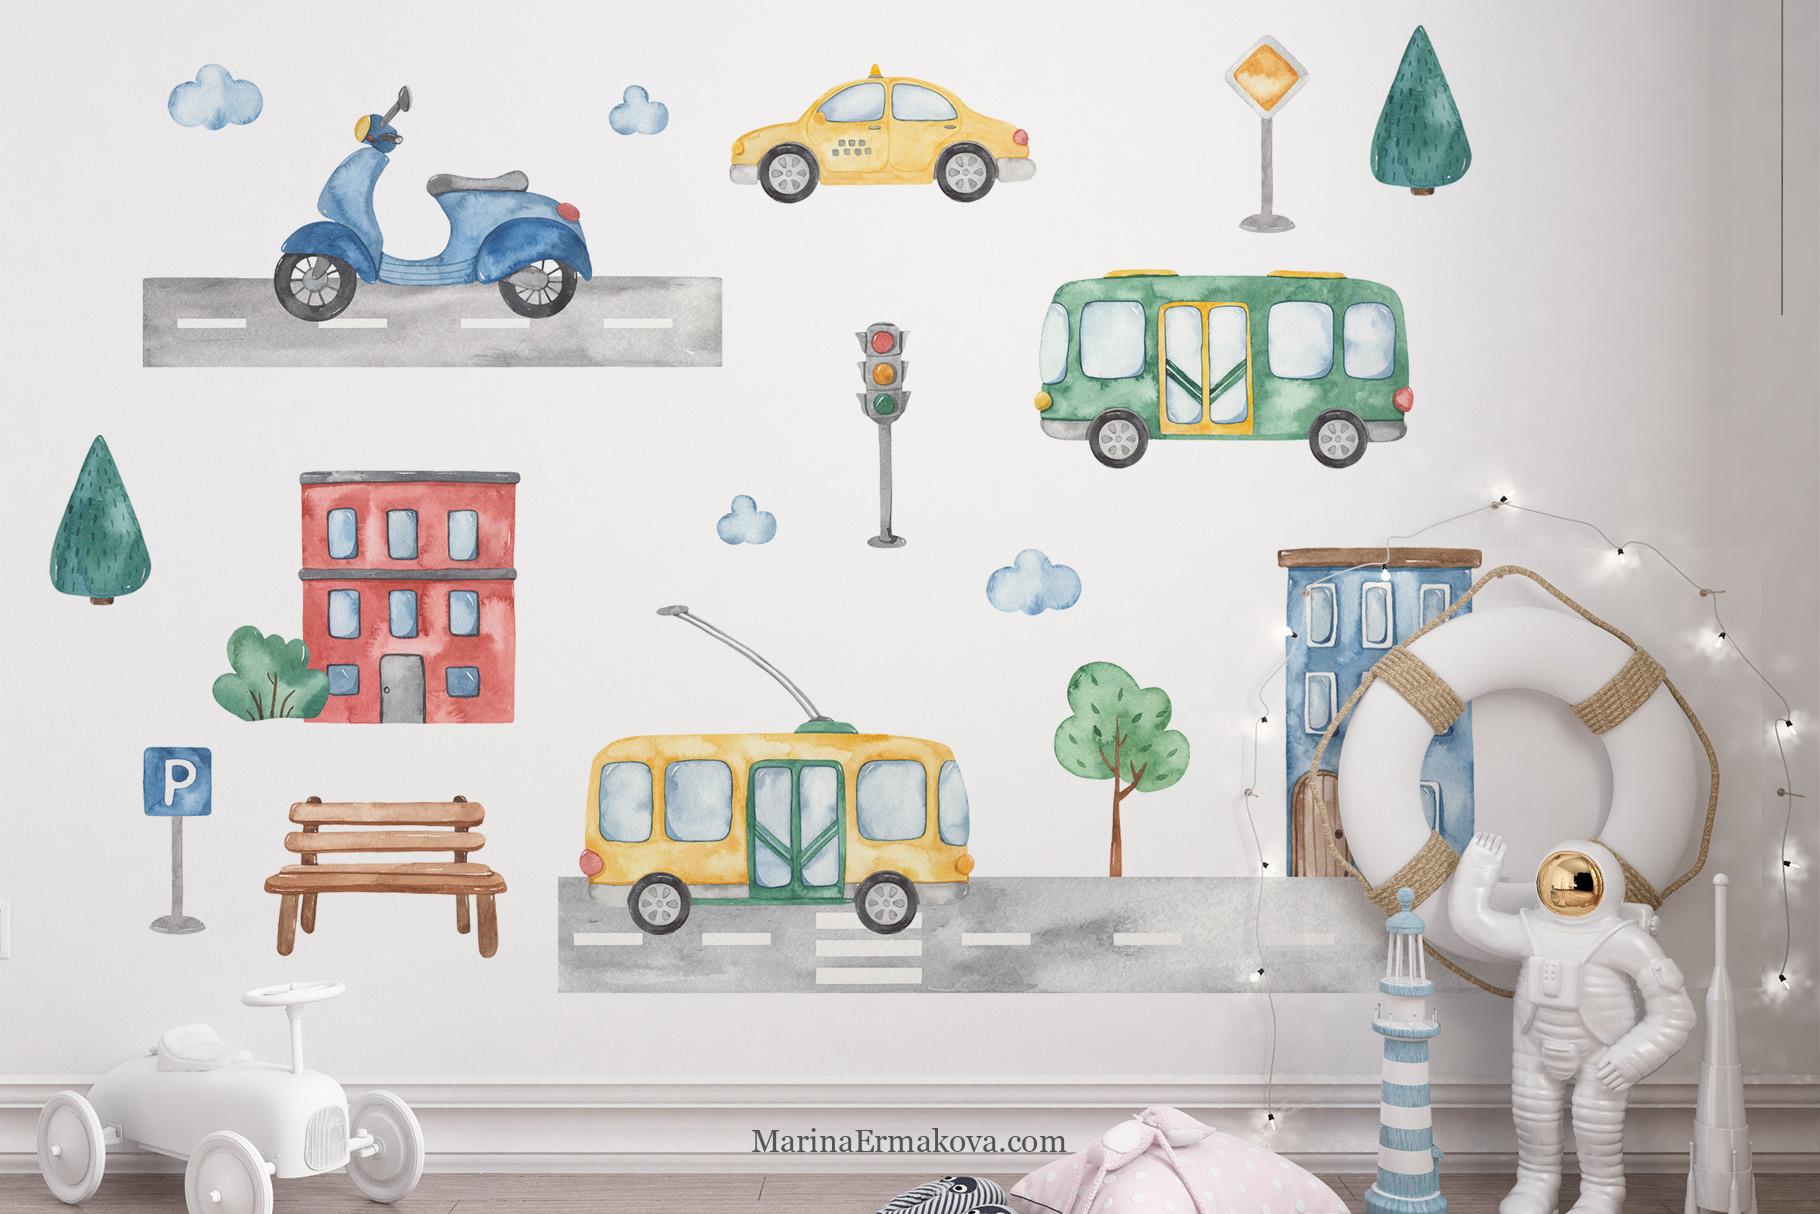 Cool urban transport illustrations on the wall.